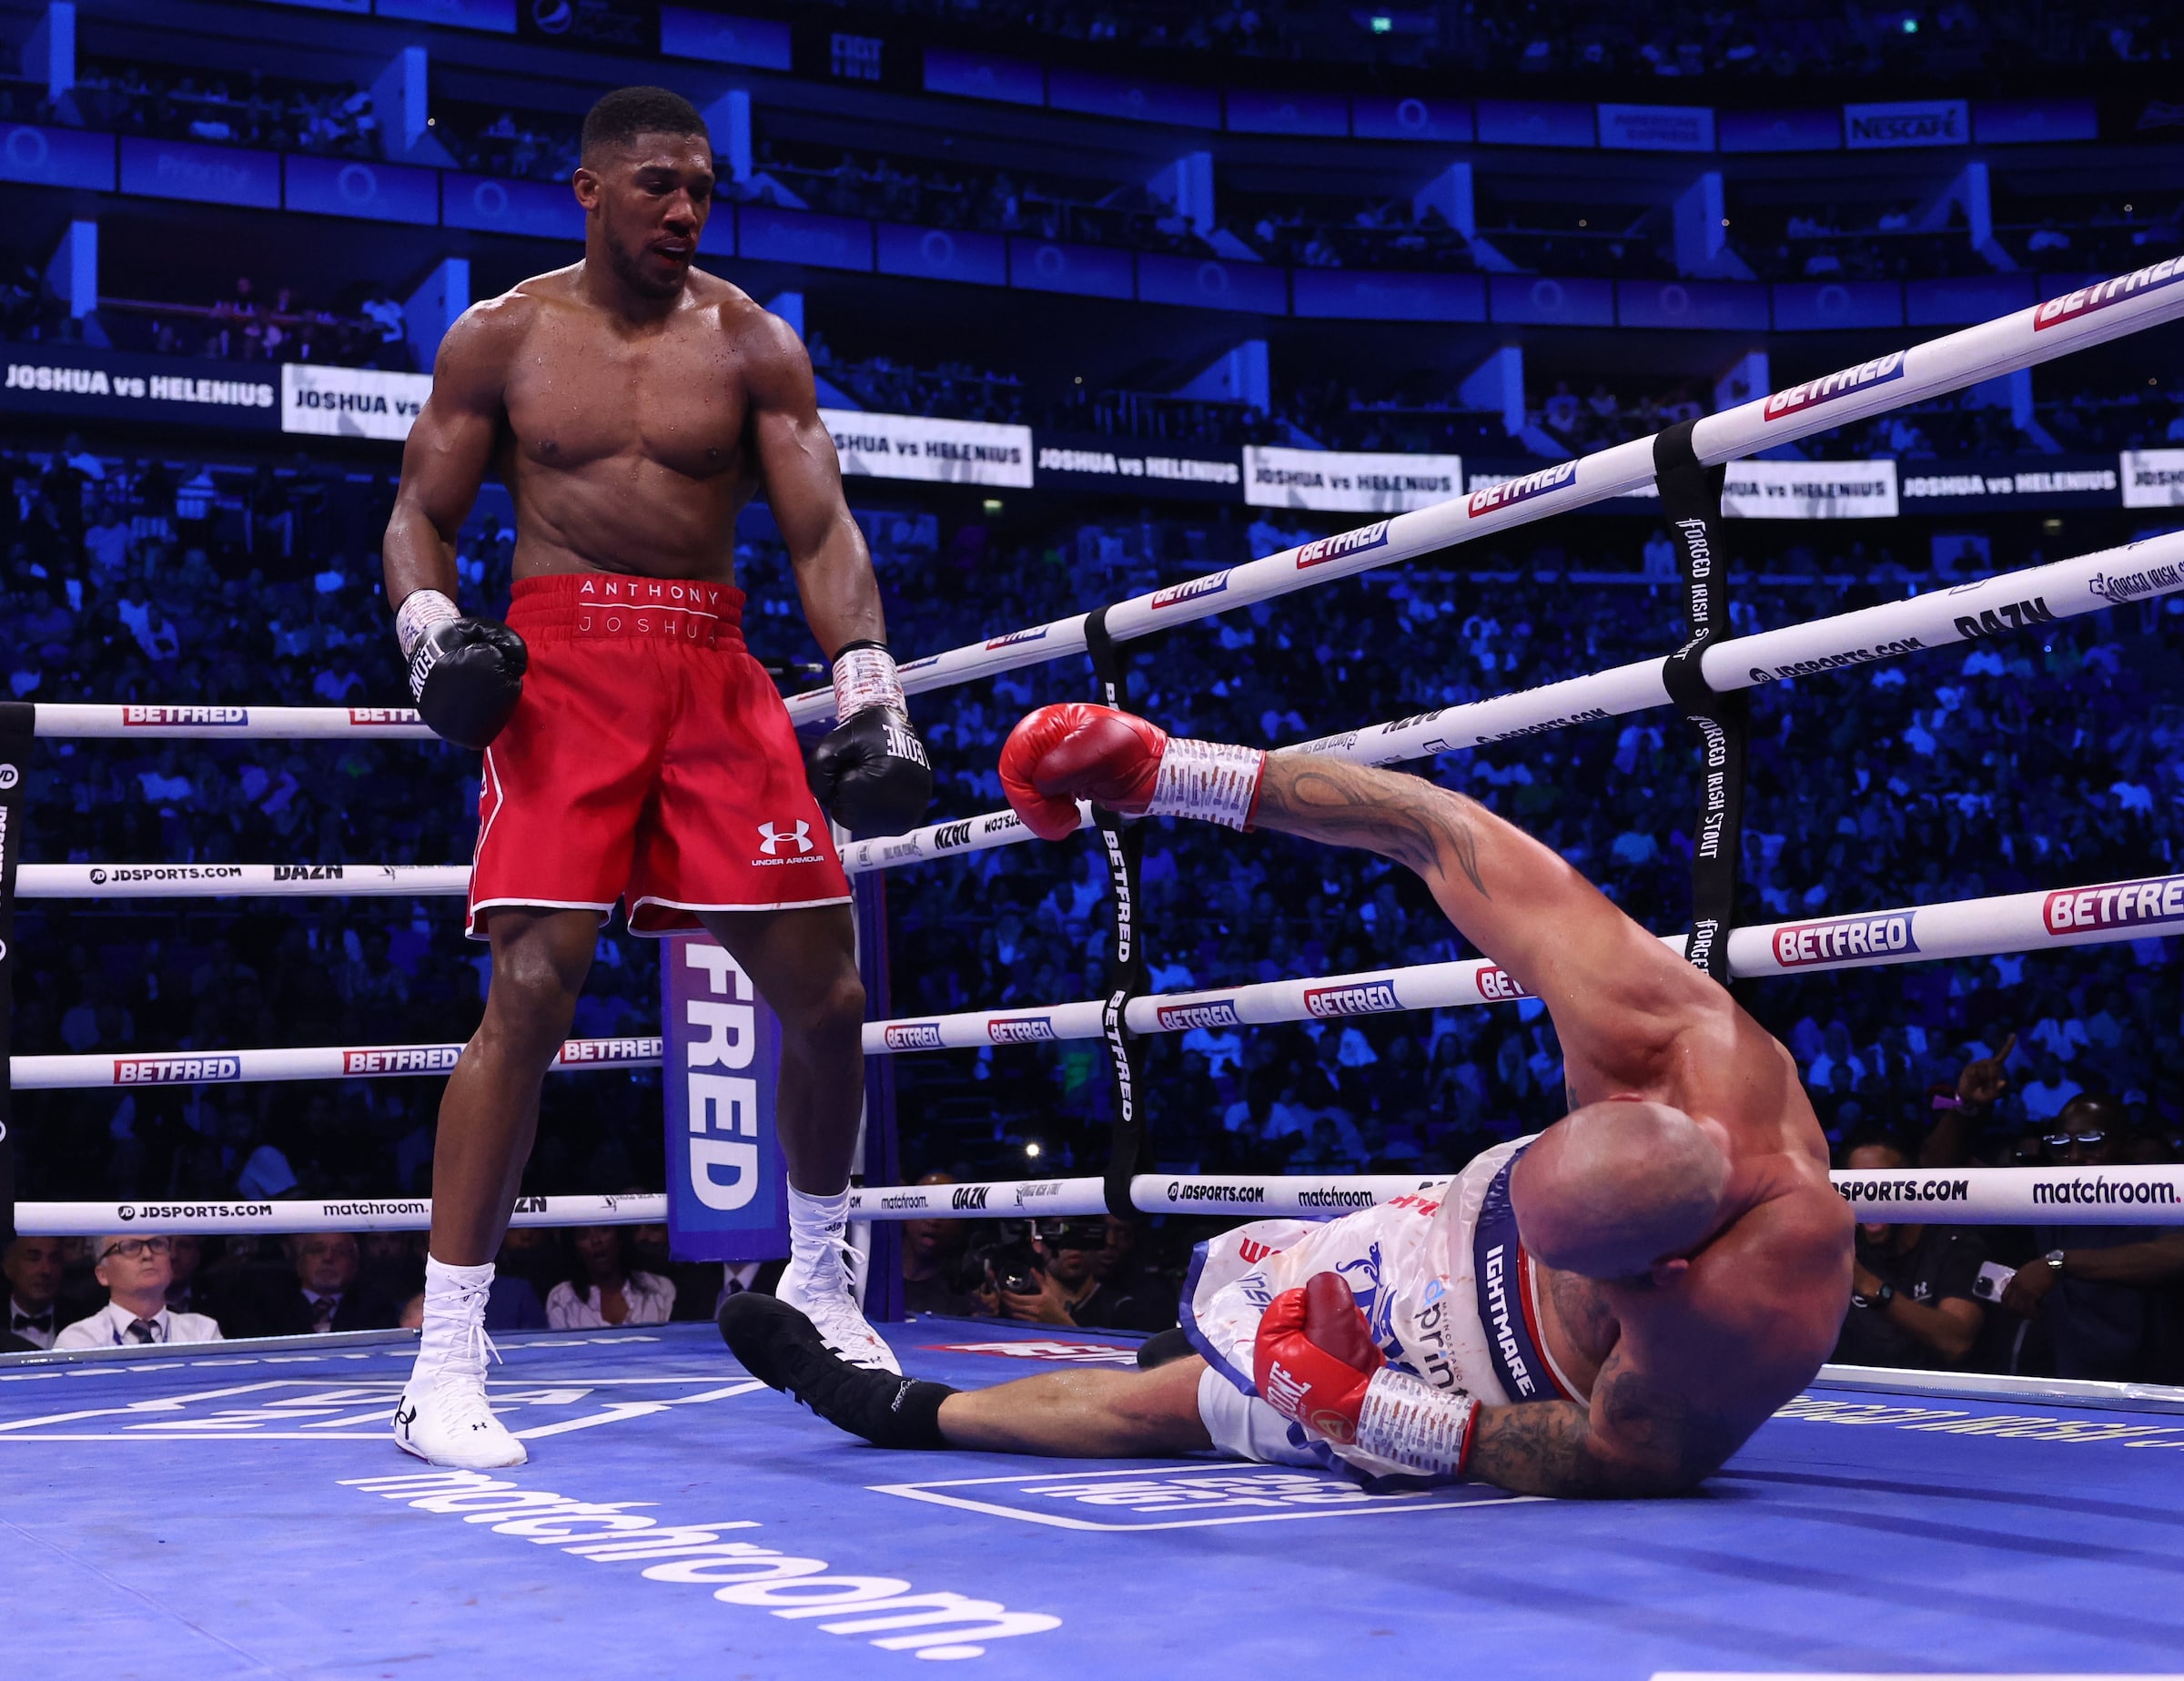 Joshua stops Whyte's replacement Helenius in the seventh round